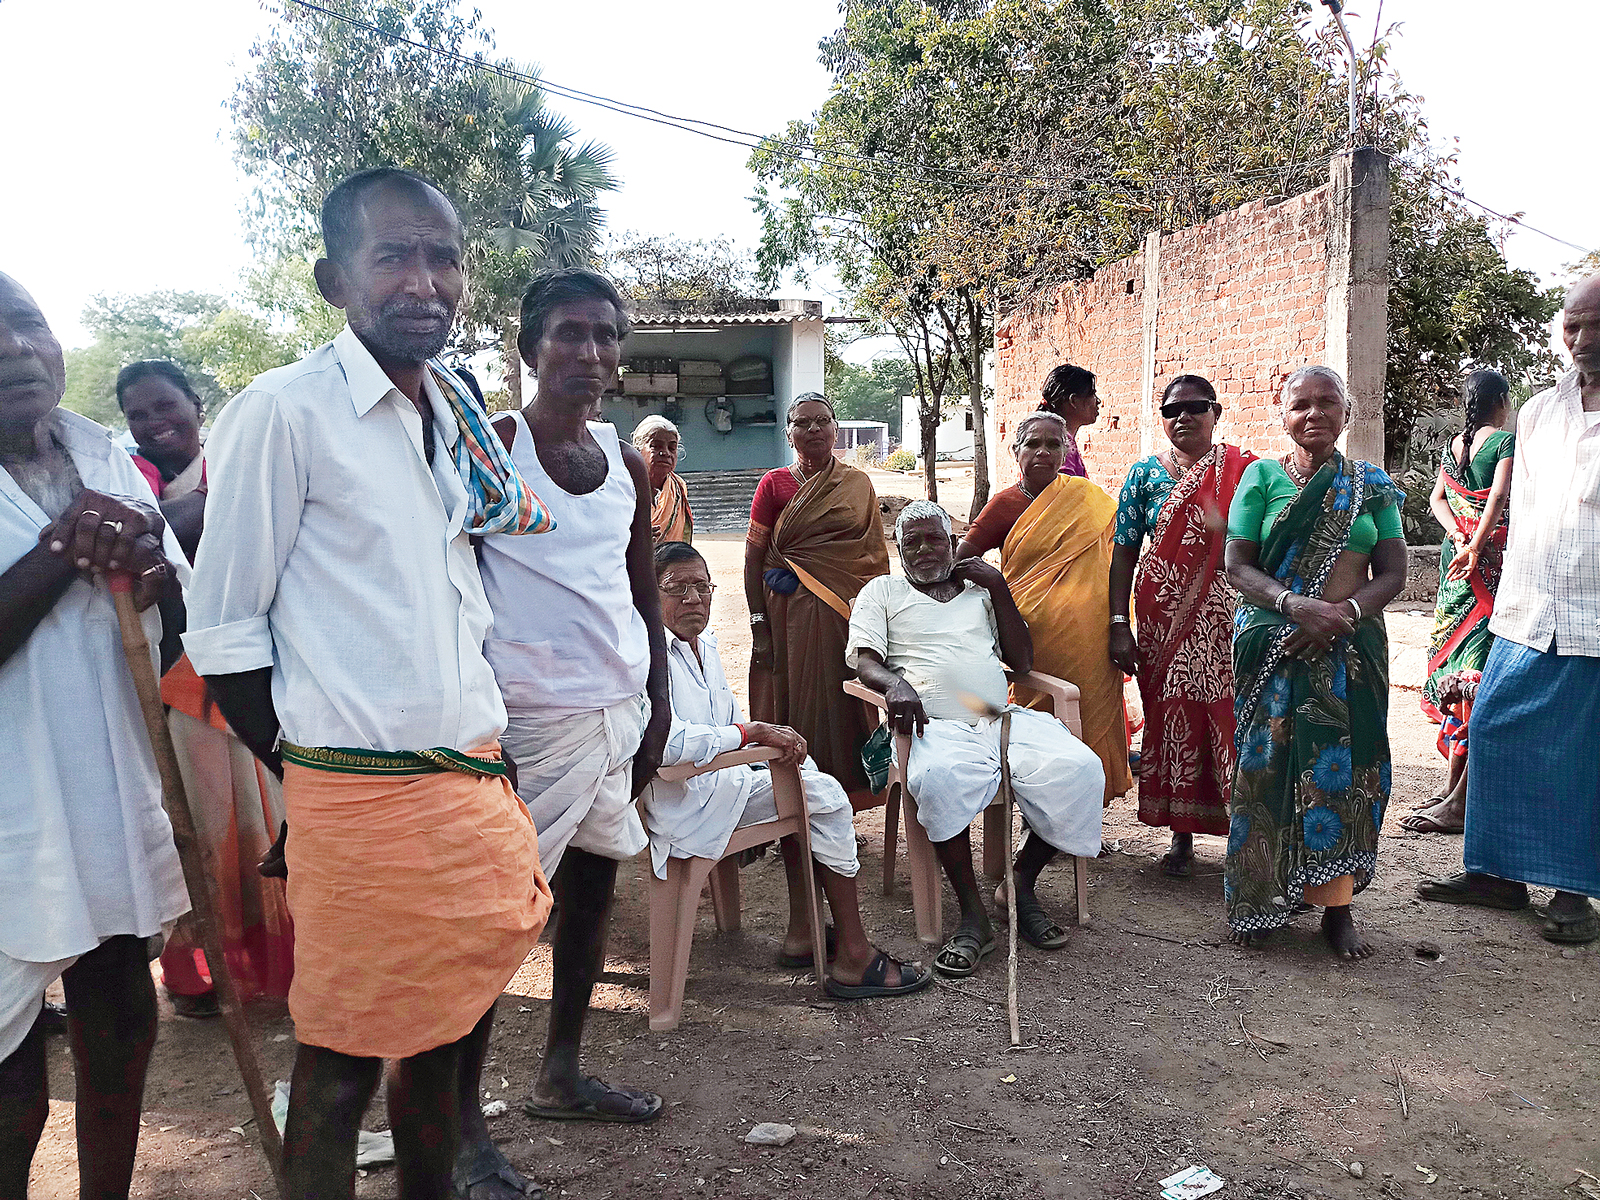 Elders wait for pension at Siddipet district’s Chowdarpally hamlet, which faces an acute water crisis. 